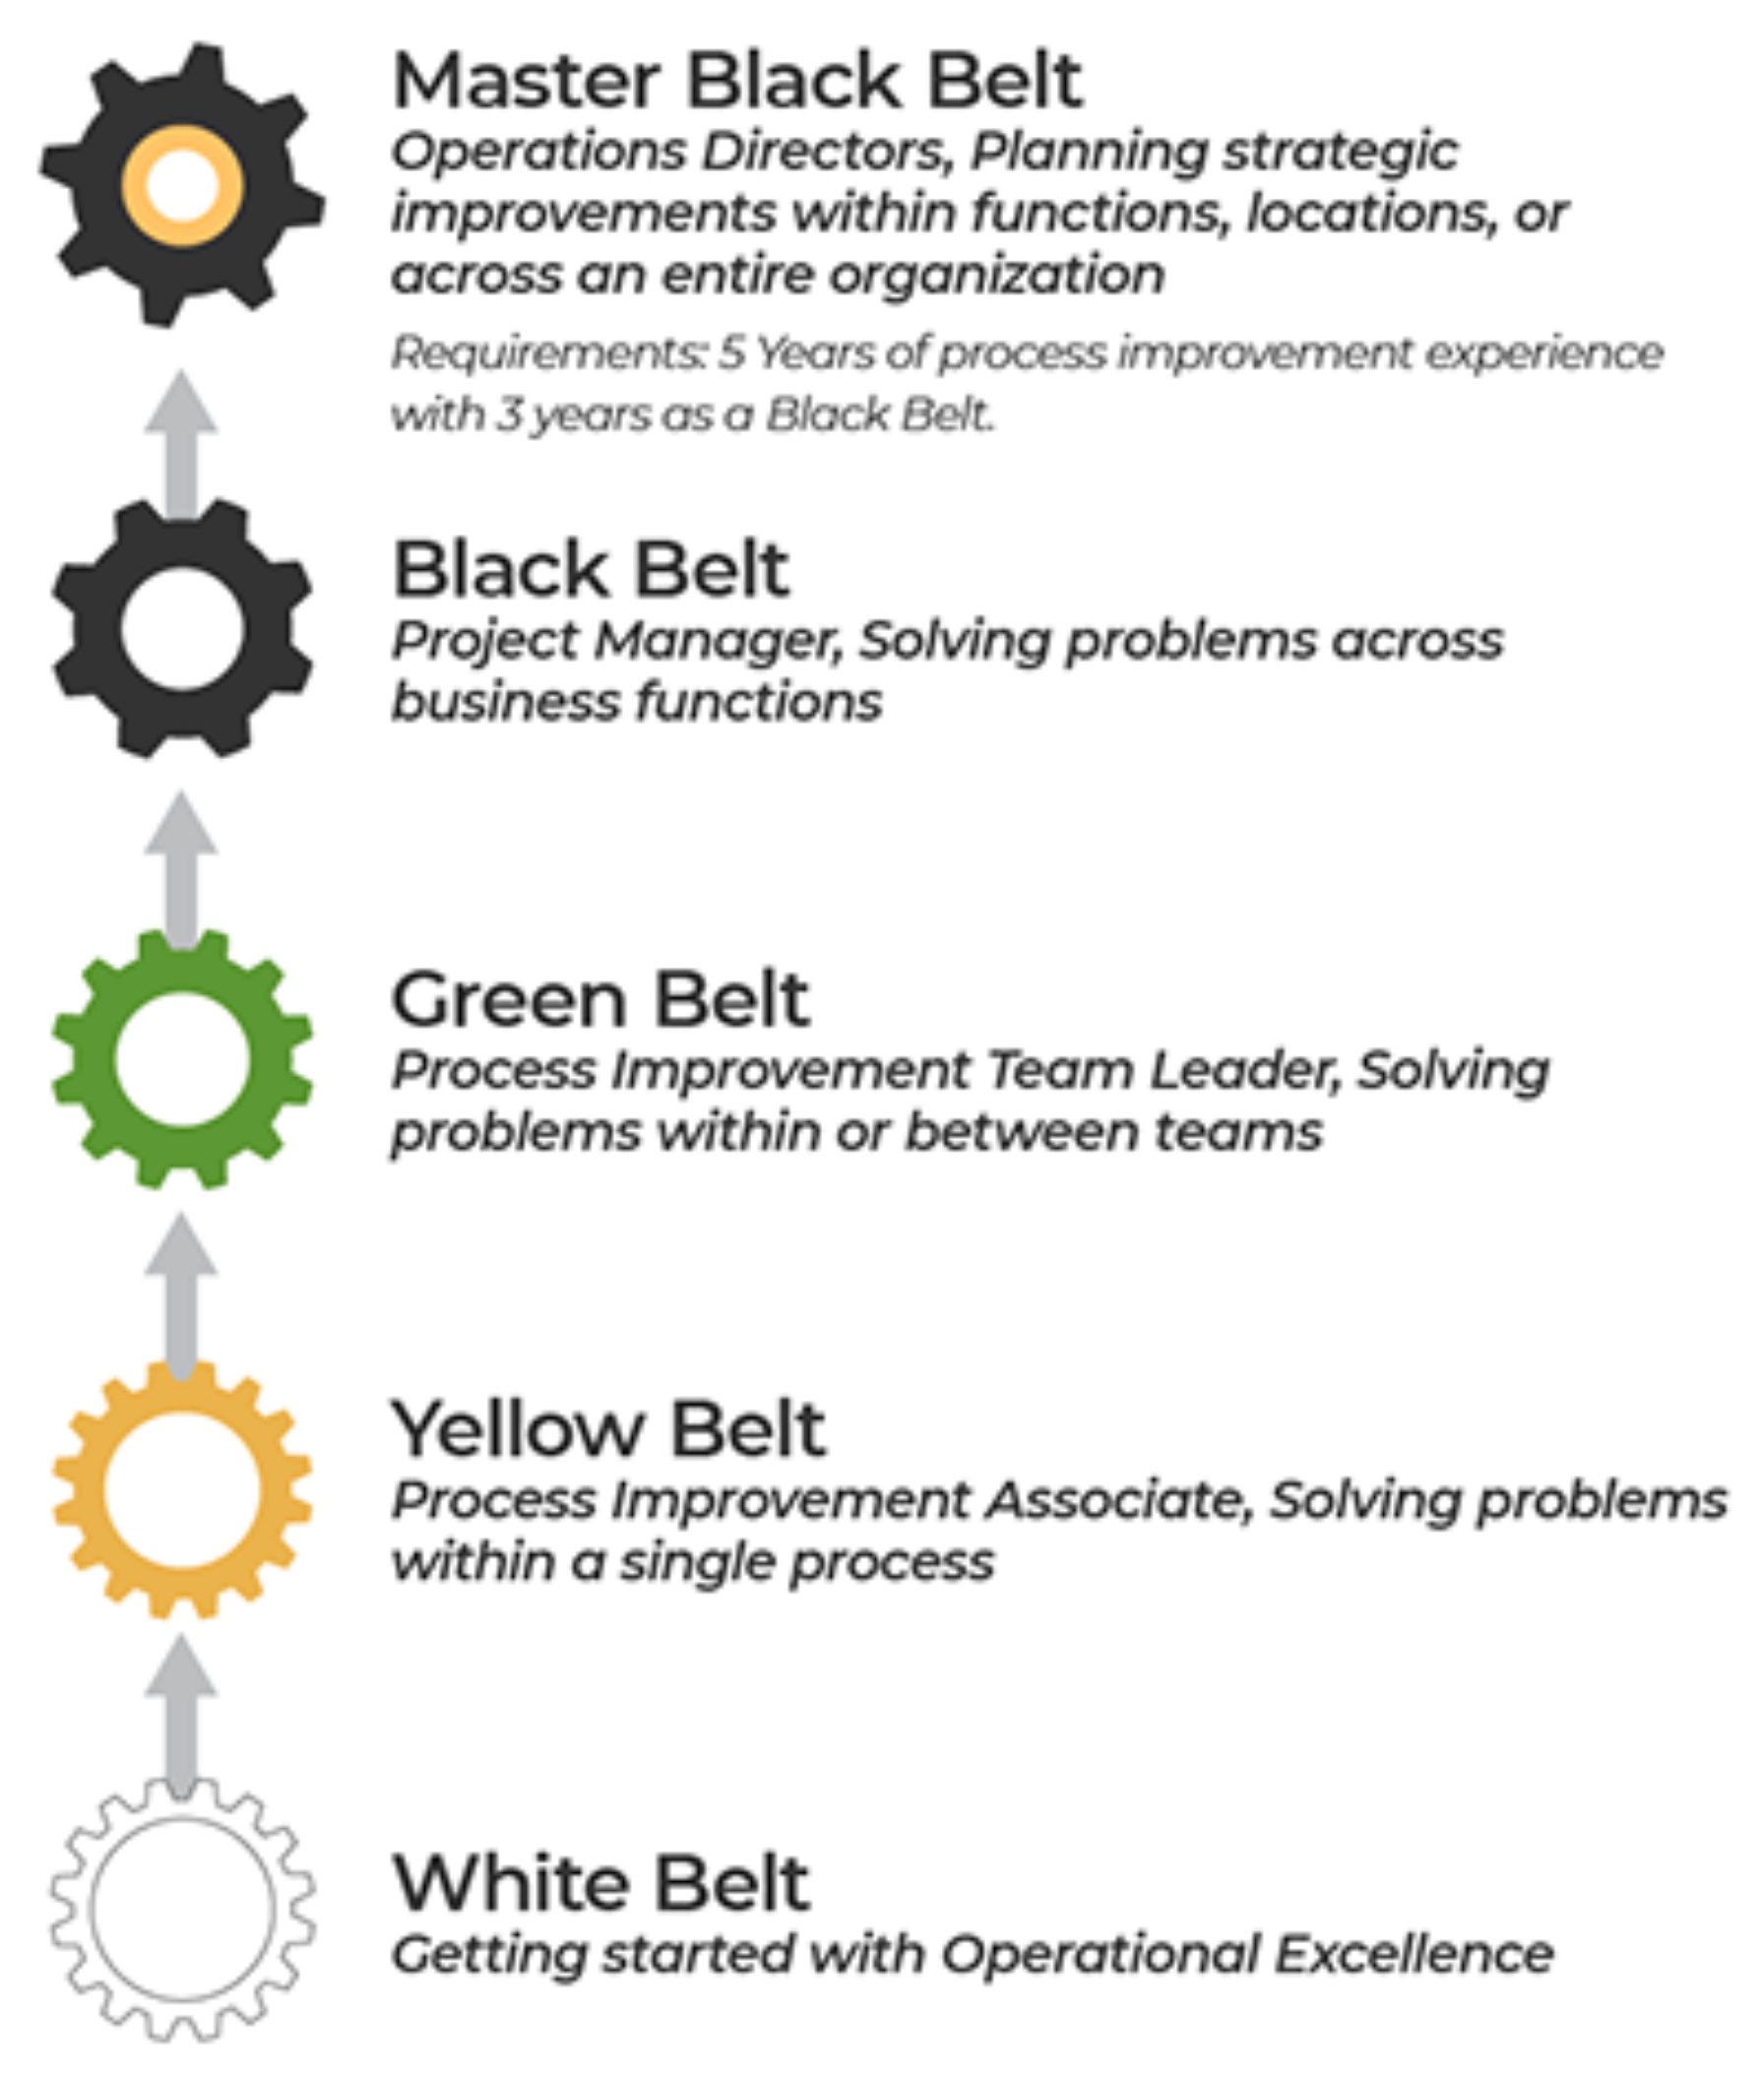 Lean Six Sigma Belt levels and how they support each other